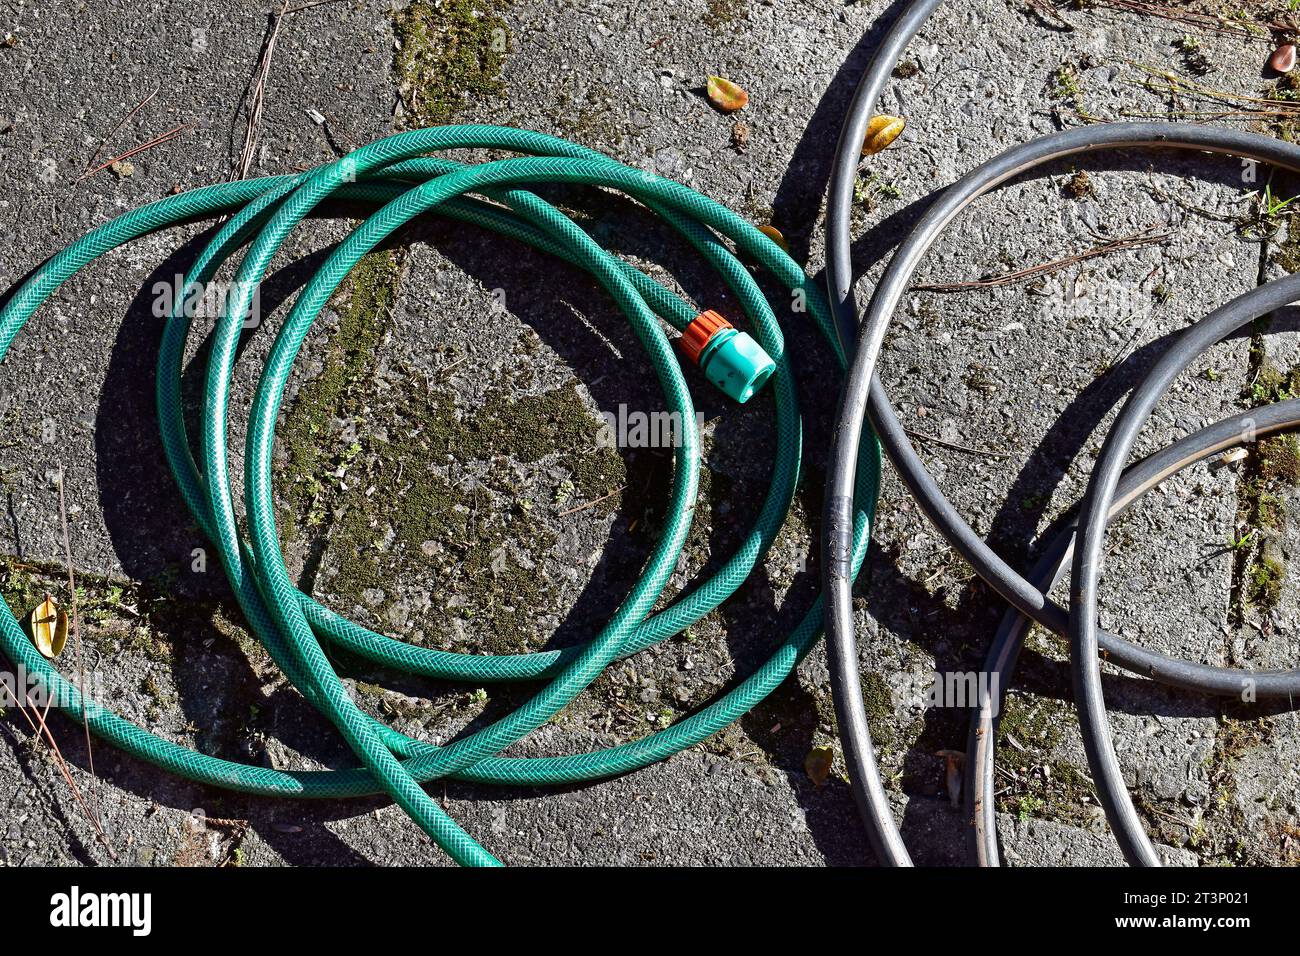 Garden rubber hoses on the ground Stock Photo